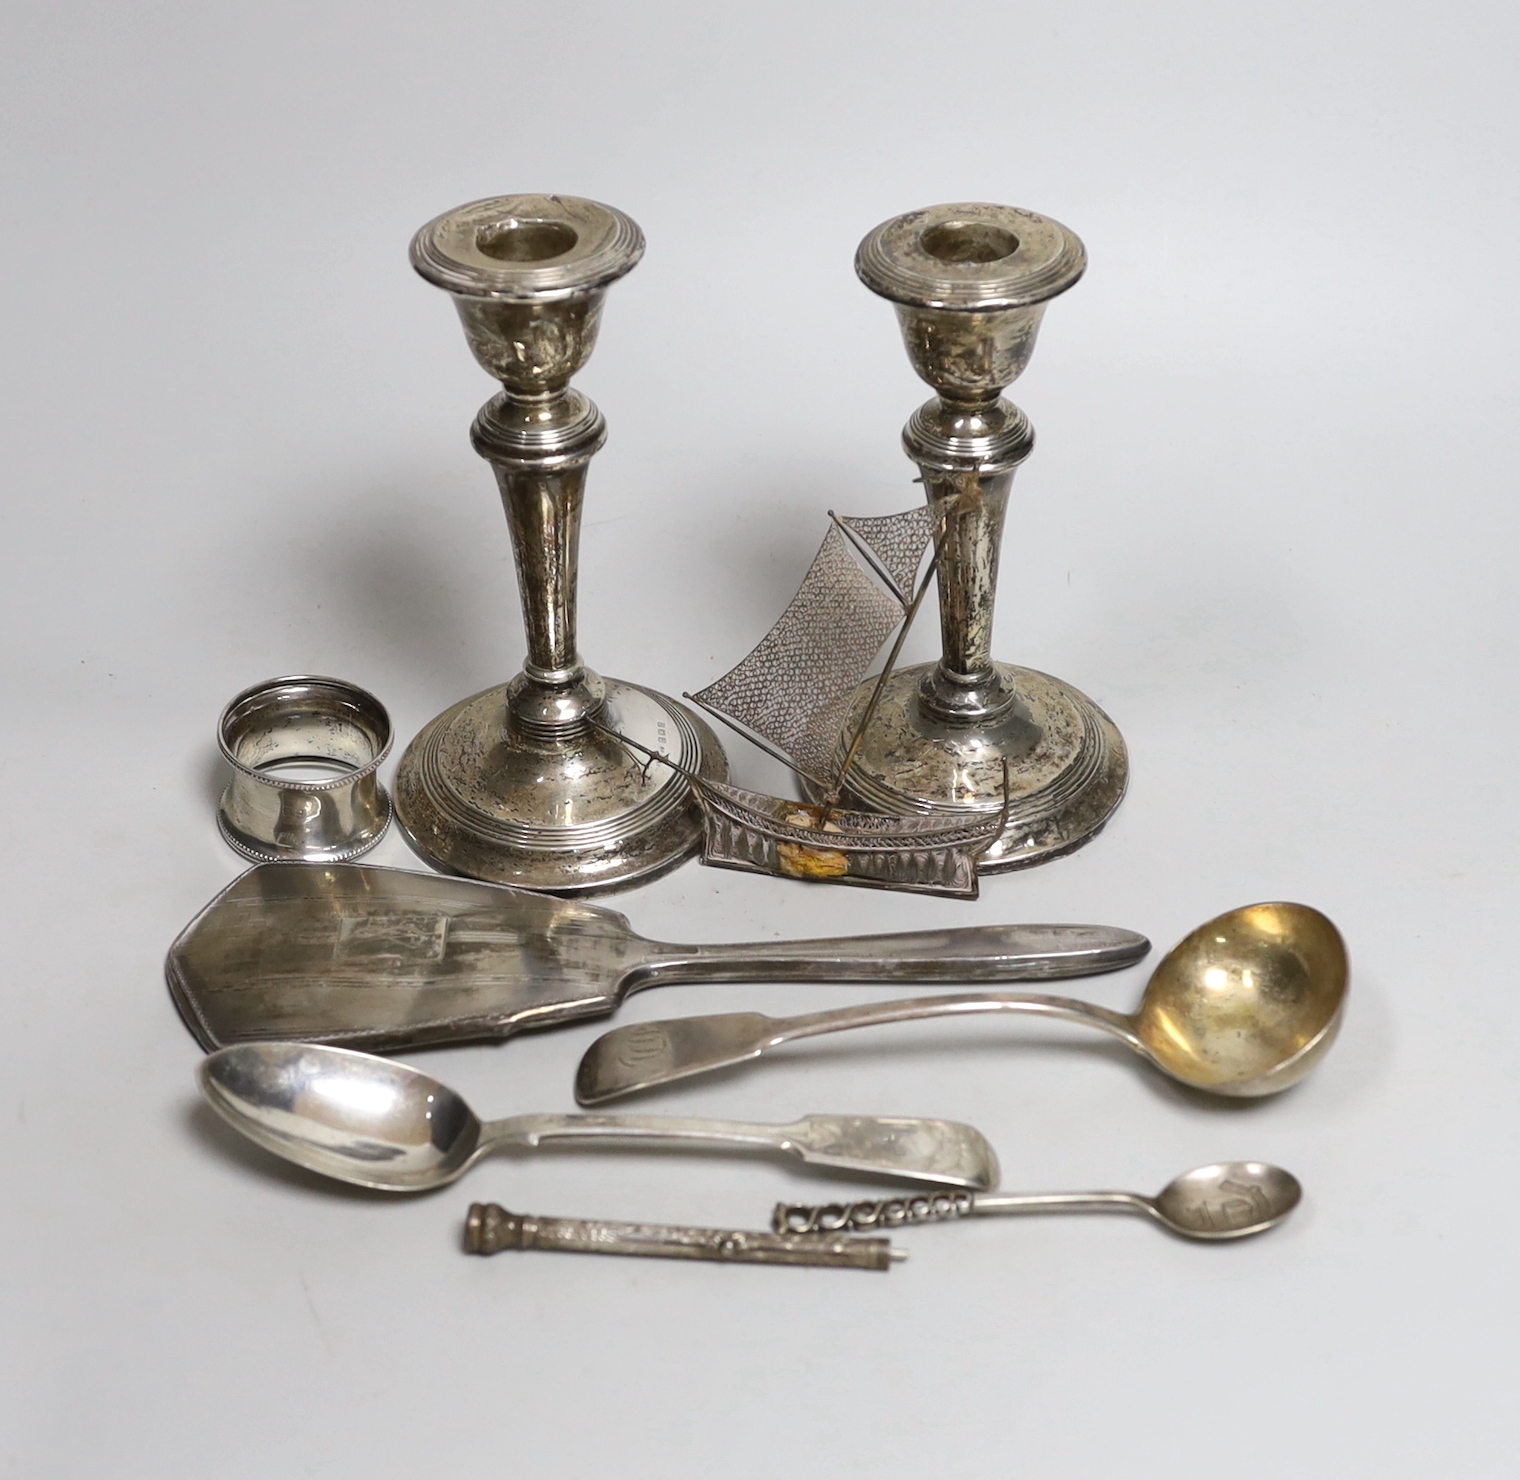 A pair of Edwardian silver candlesticks, Birmingham, 1909, 15.2cm (a.f.) a George IV silver sauce ladle and other items including a napkin ring and two silver spoons.                                                      